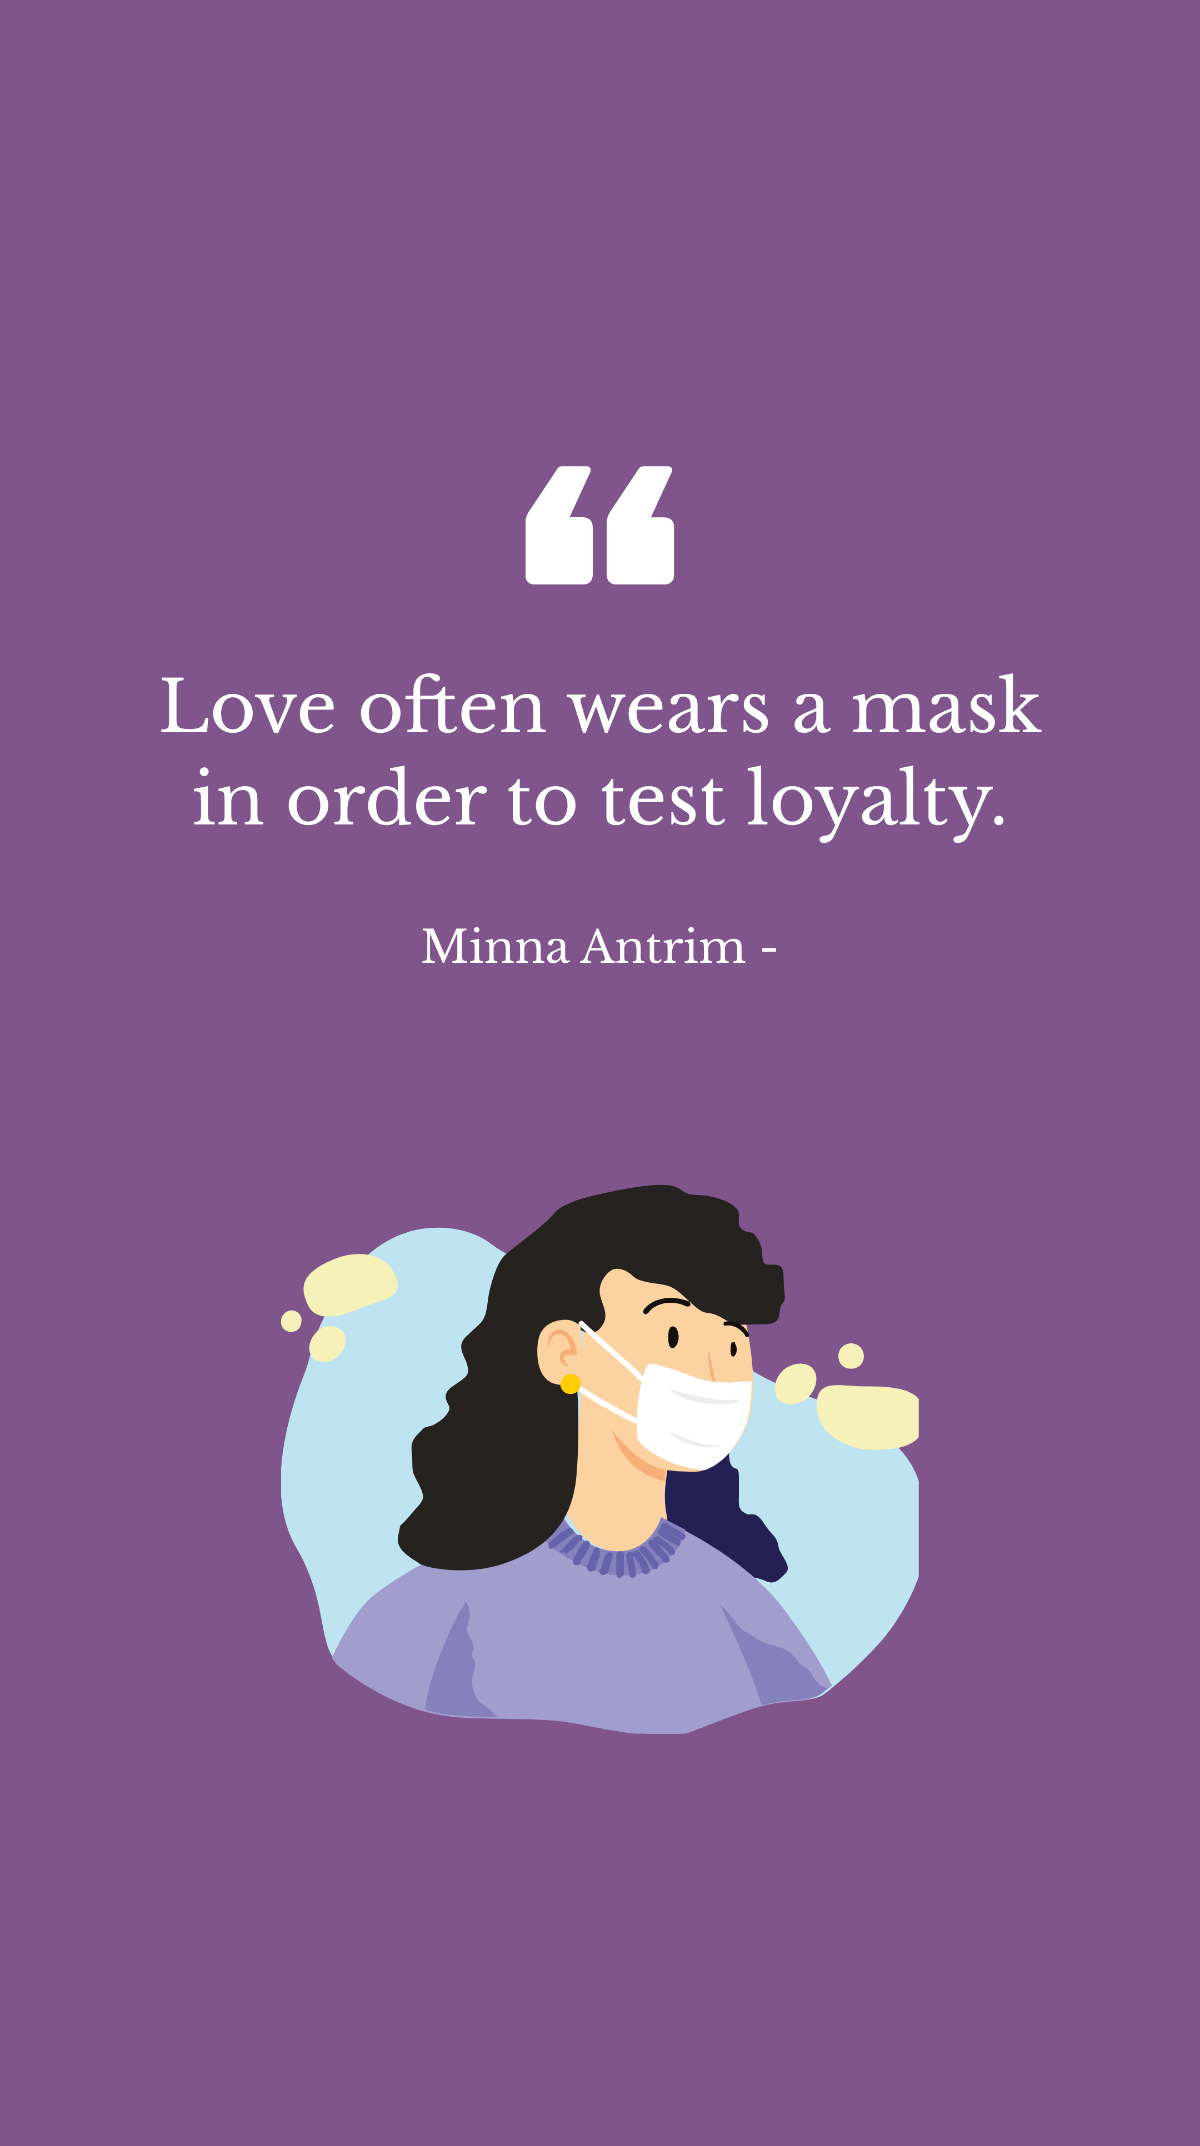 Free Minna Antrim - Love often wears a mask in order to test loyalty. Template